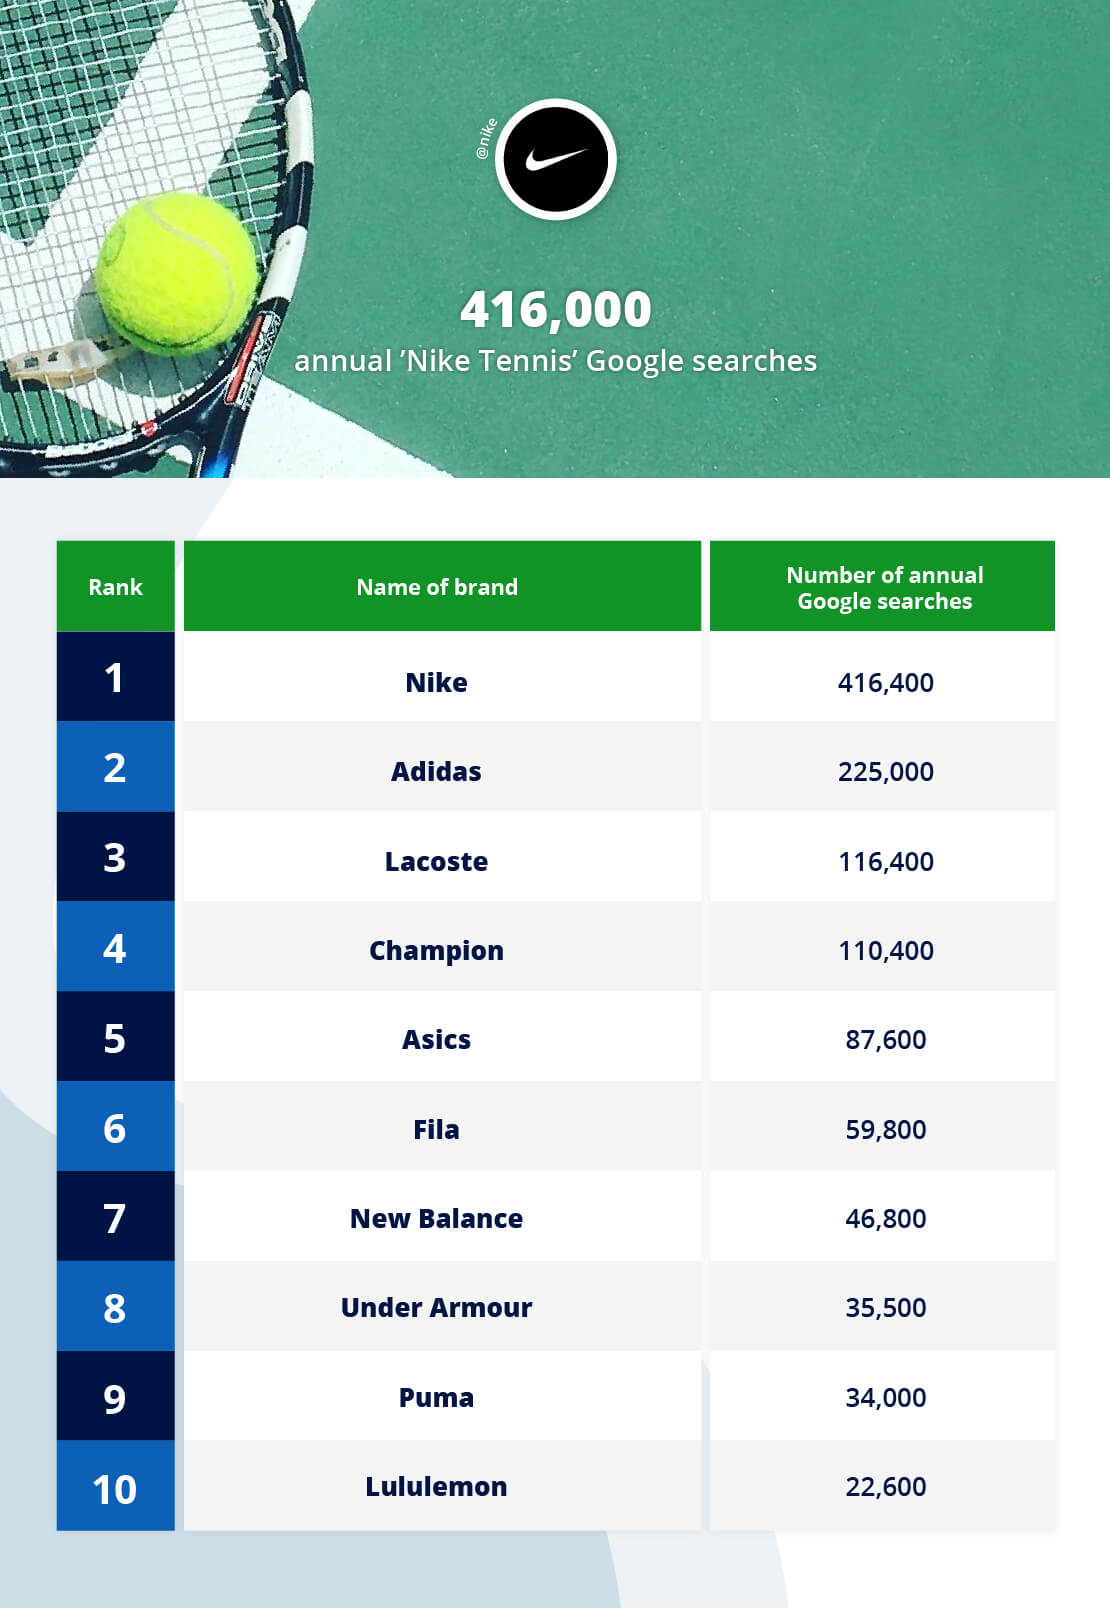 The most searched tennis brand in the world